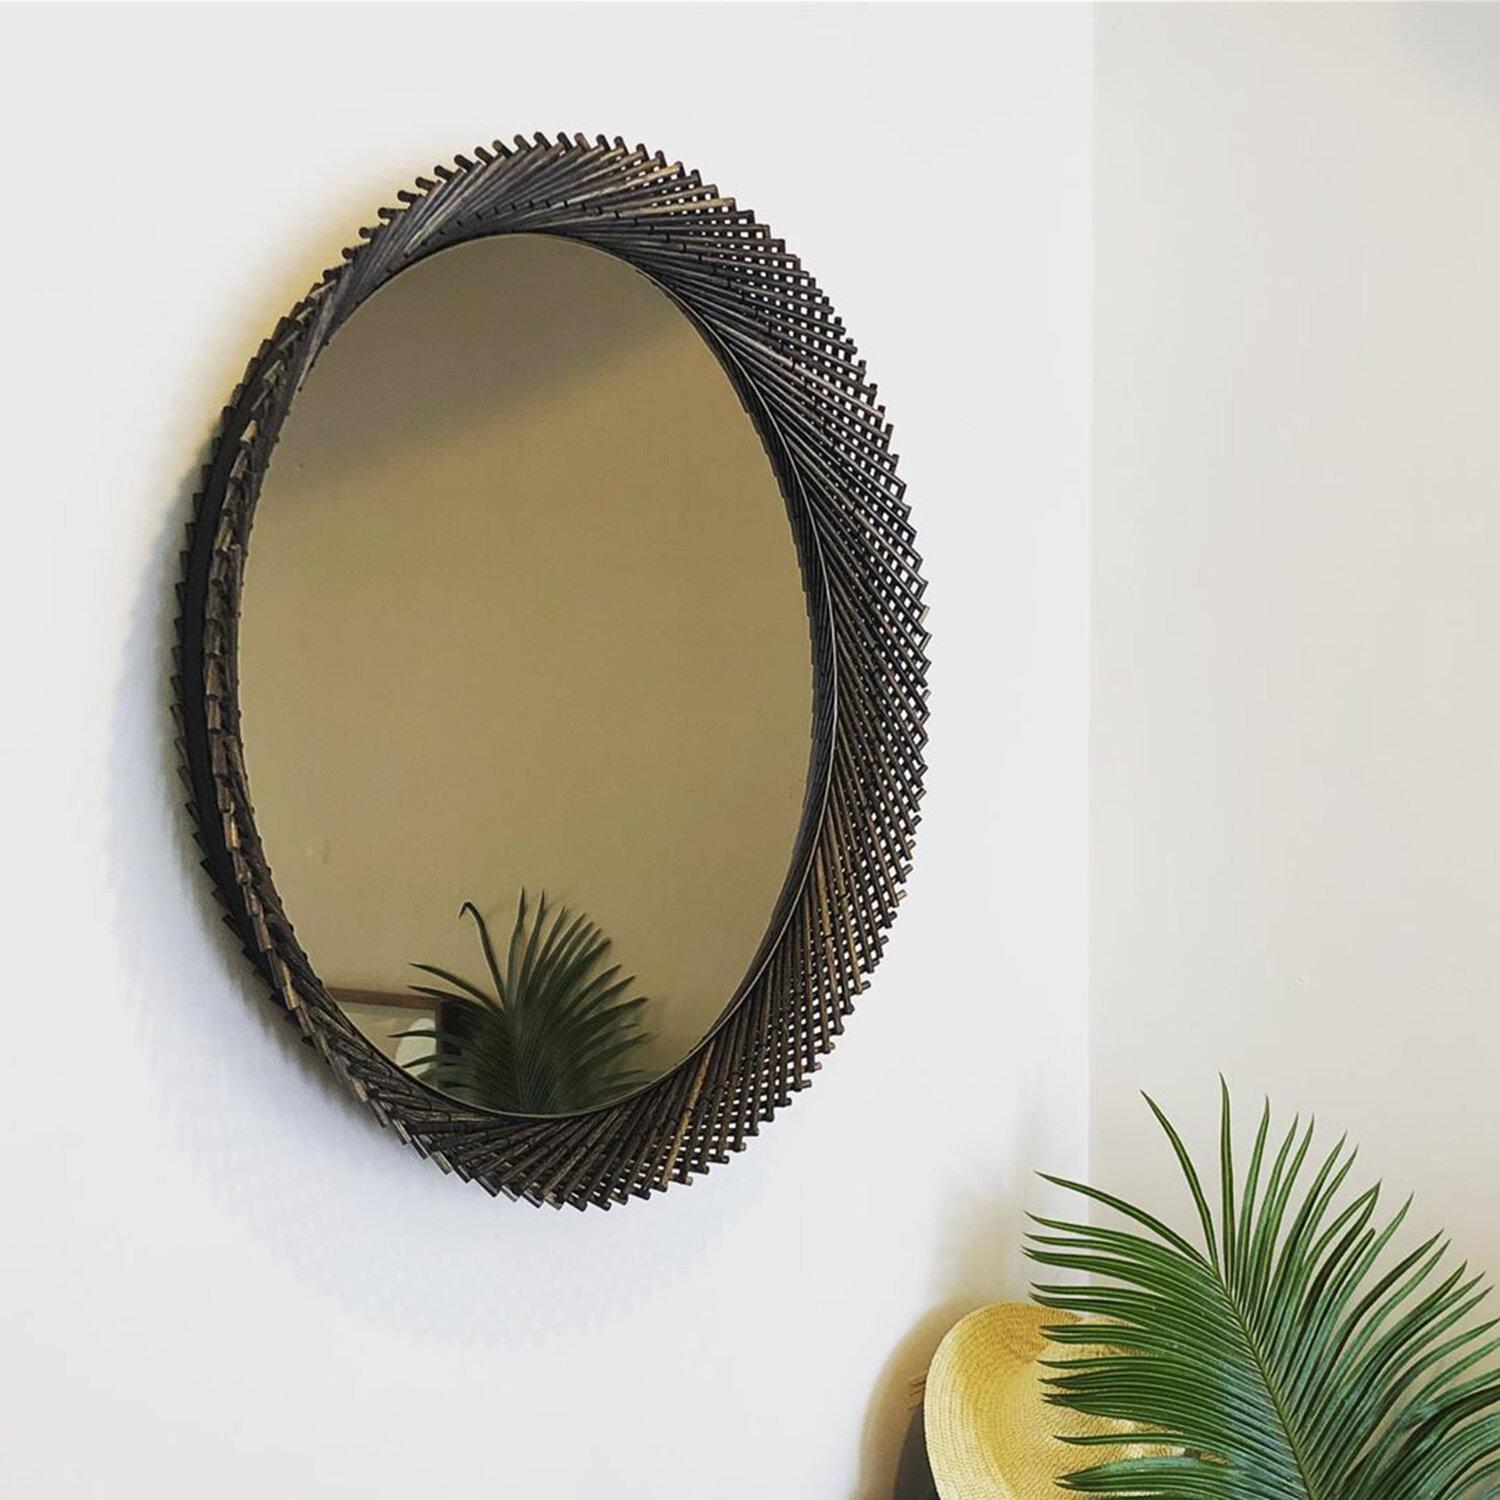 Mooda Round Mirror 30 / Oxidized Maple Wood, Clear Mirror by INDO- For Sale 4